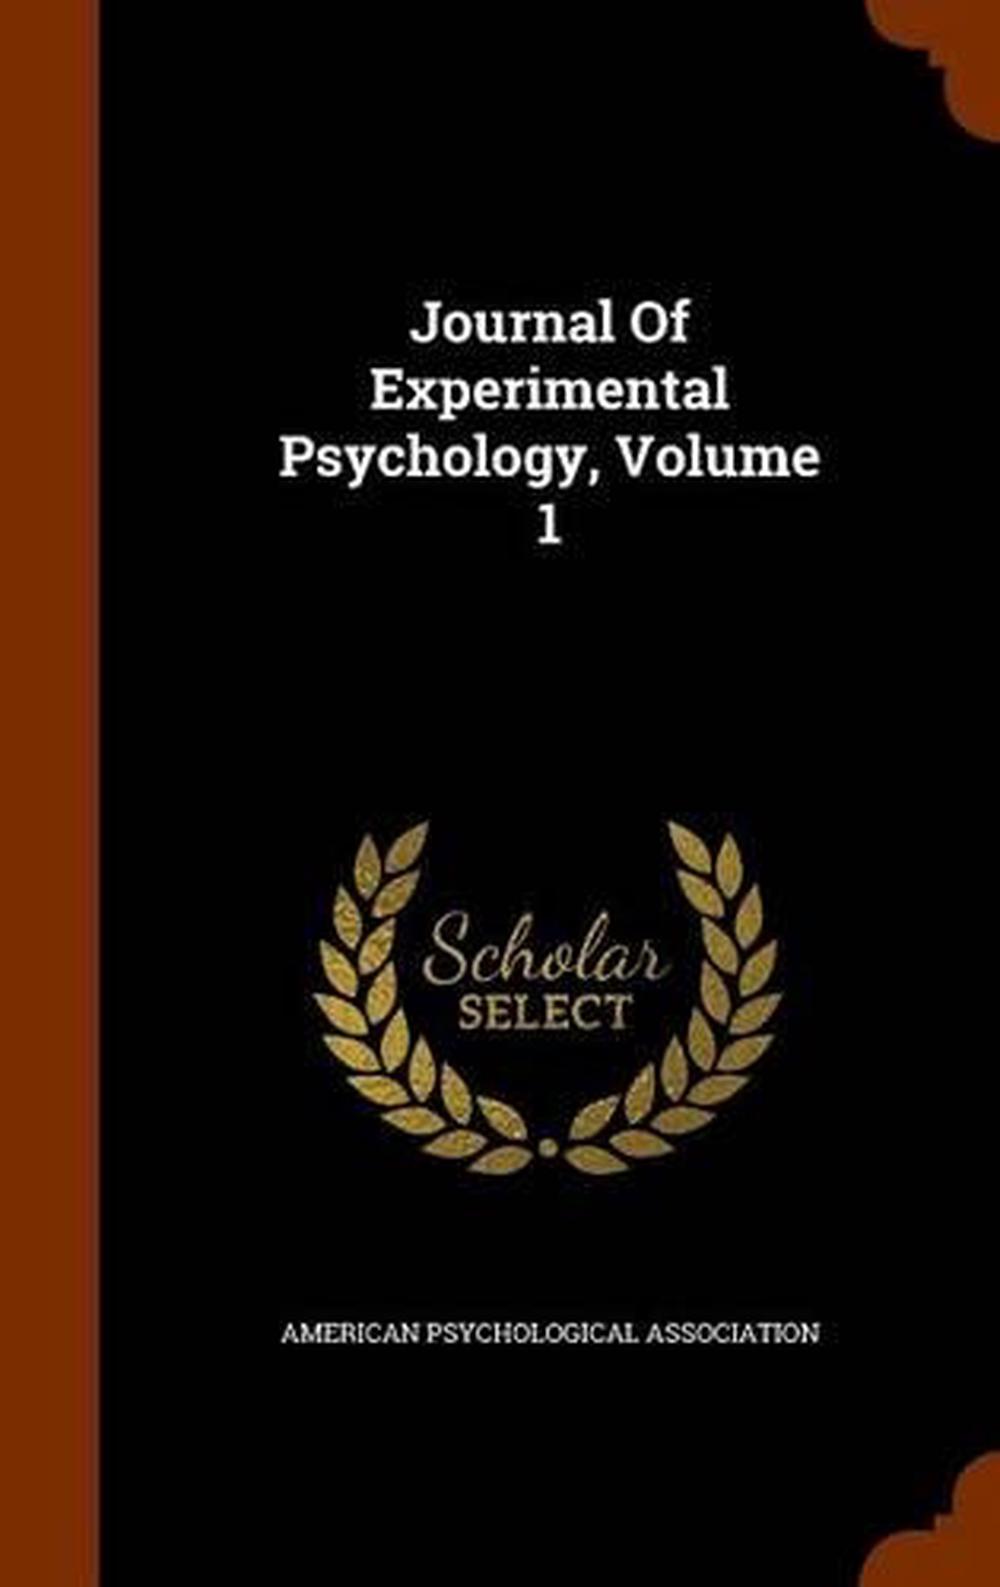 experimental psychology research article